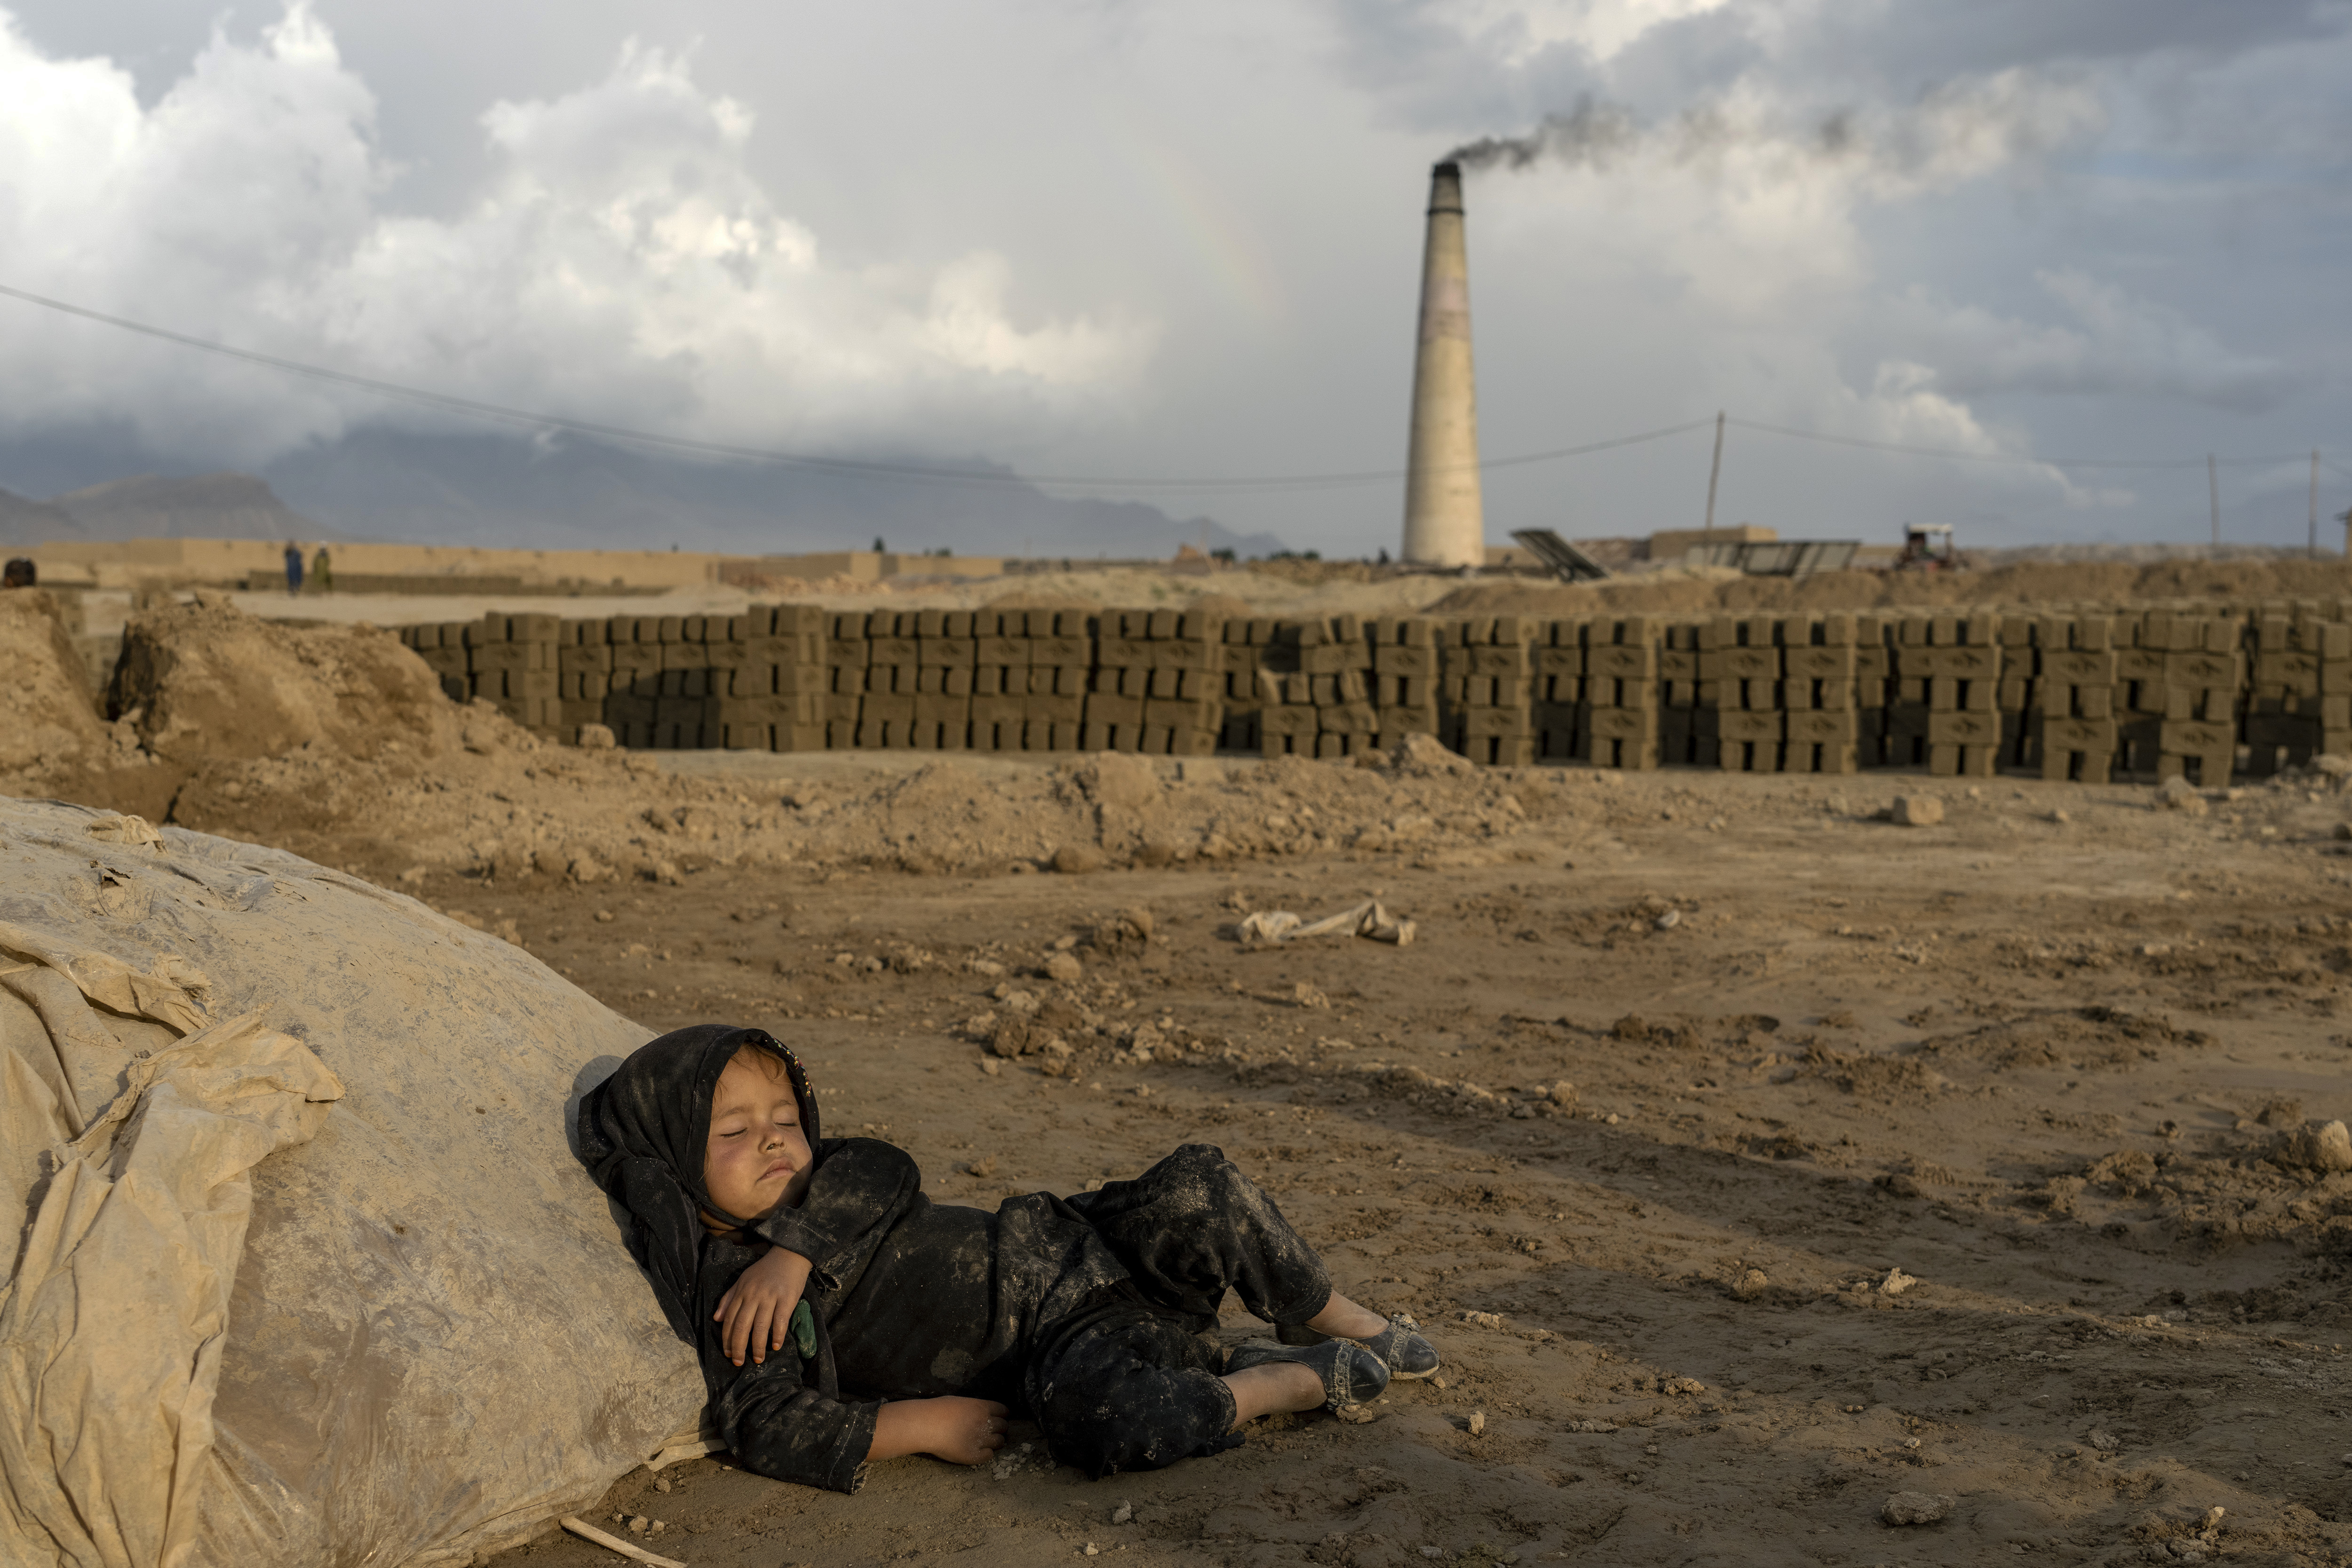 A 4-Year-Old Afghan Girl Sleeps After Working In A Brick Factory On The Outskirts Of Kabul.